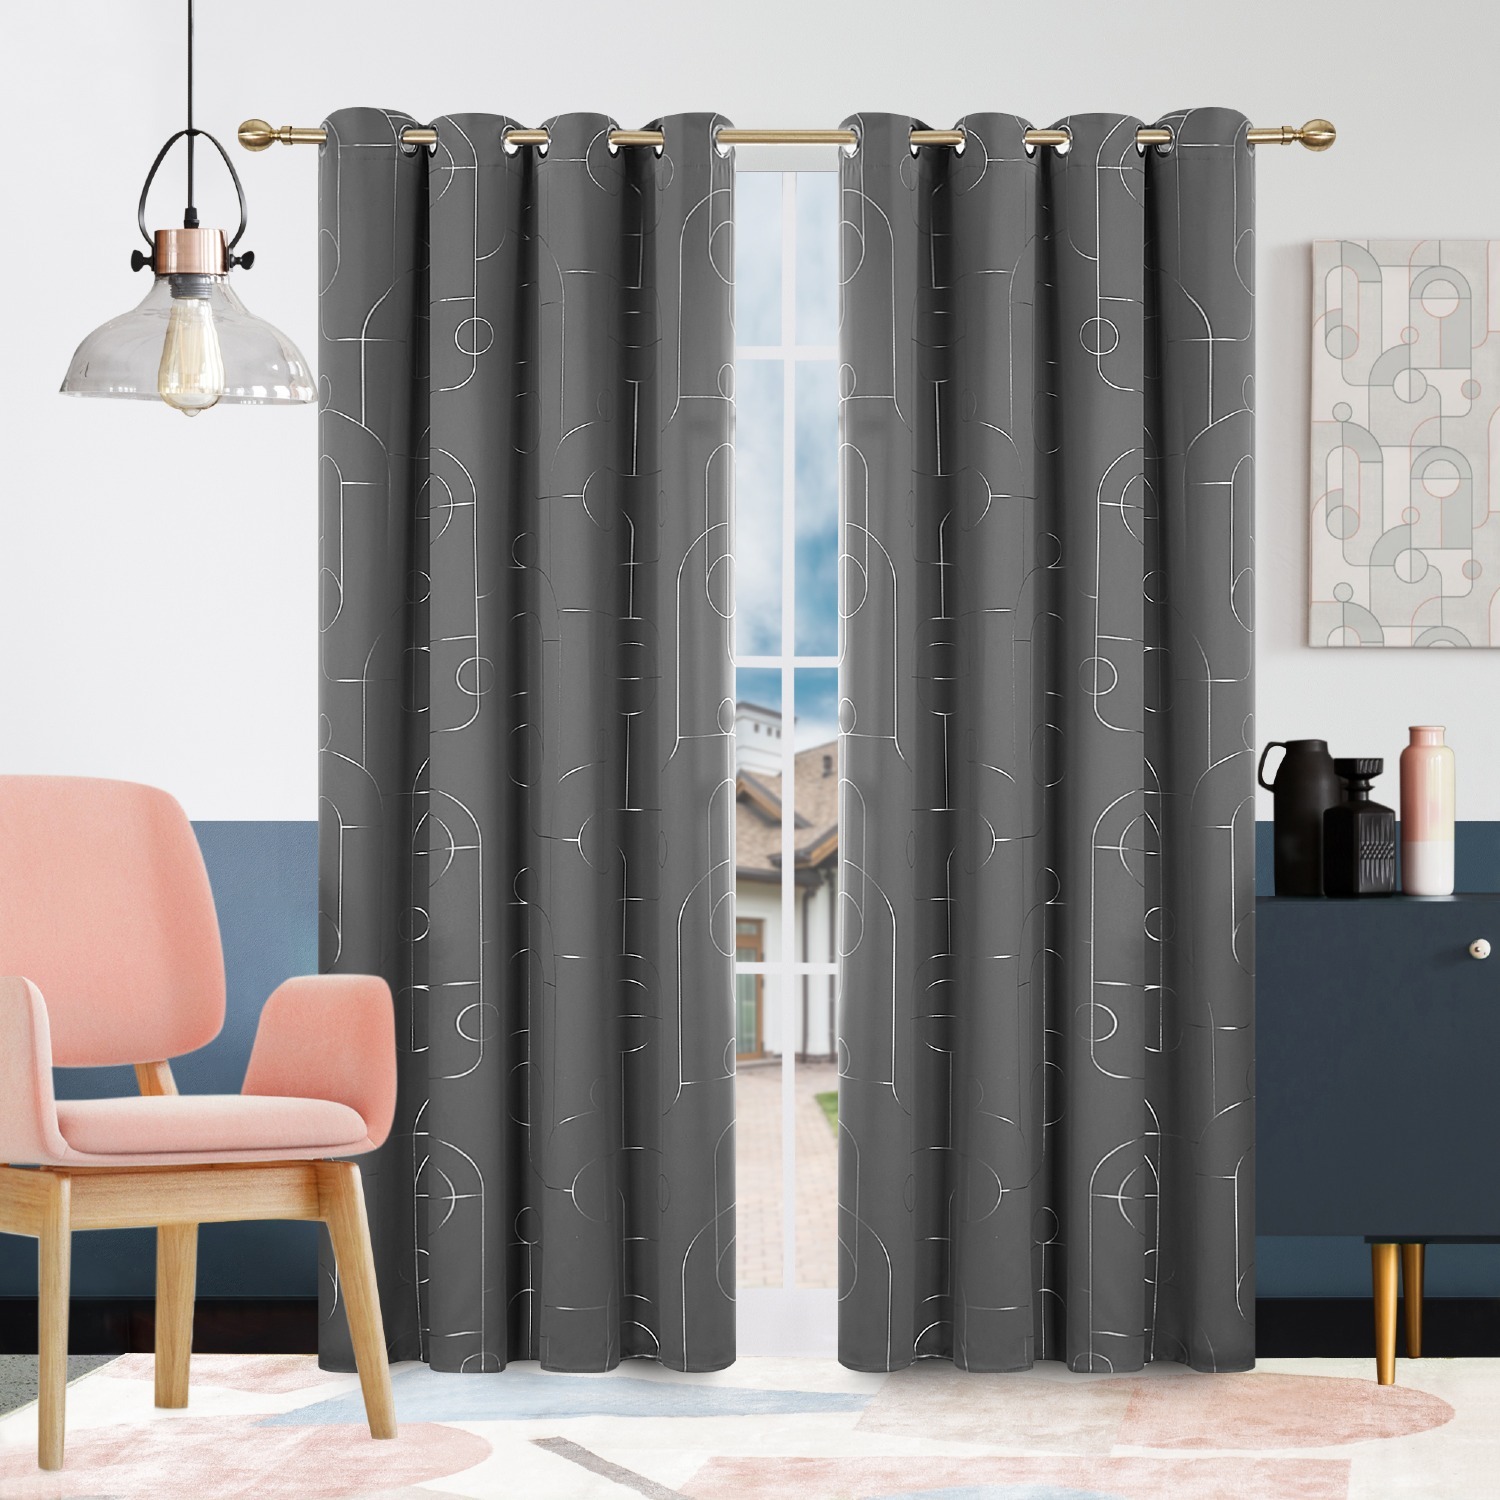 2-Pack Deconovo Thermal Insulated Blackout Curtains (Various Colors & Sizes) from $9 + Free Shipping w/ Prime or $35+ orders